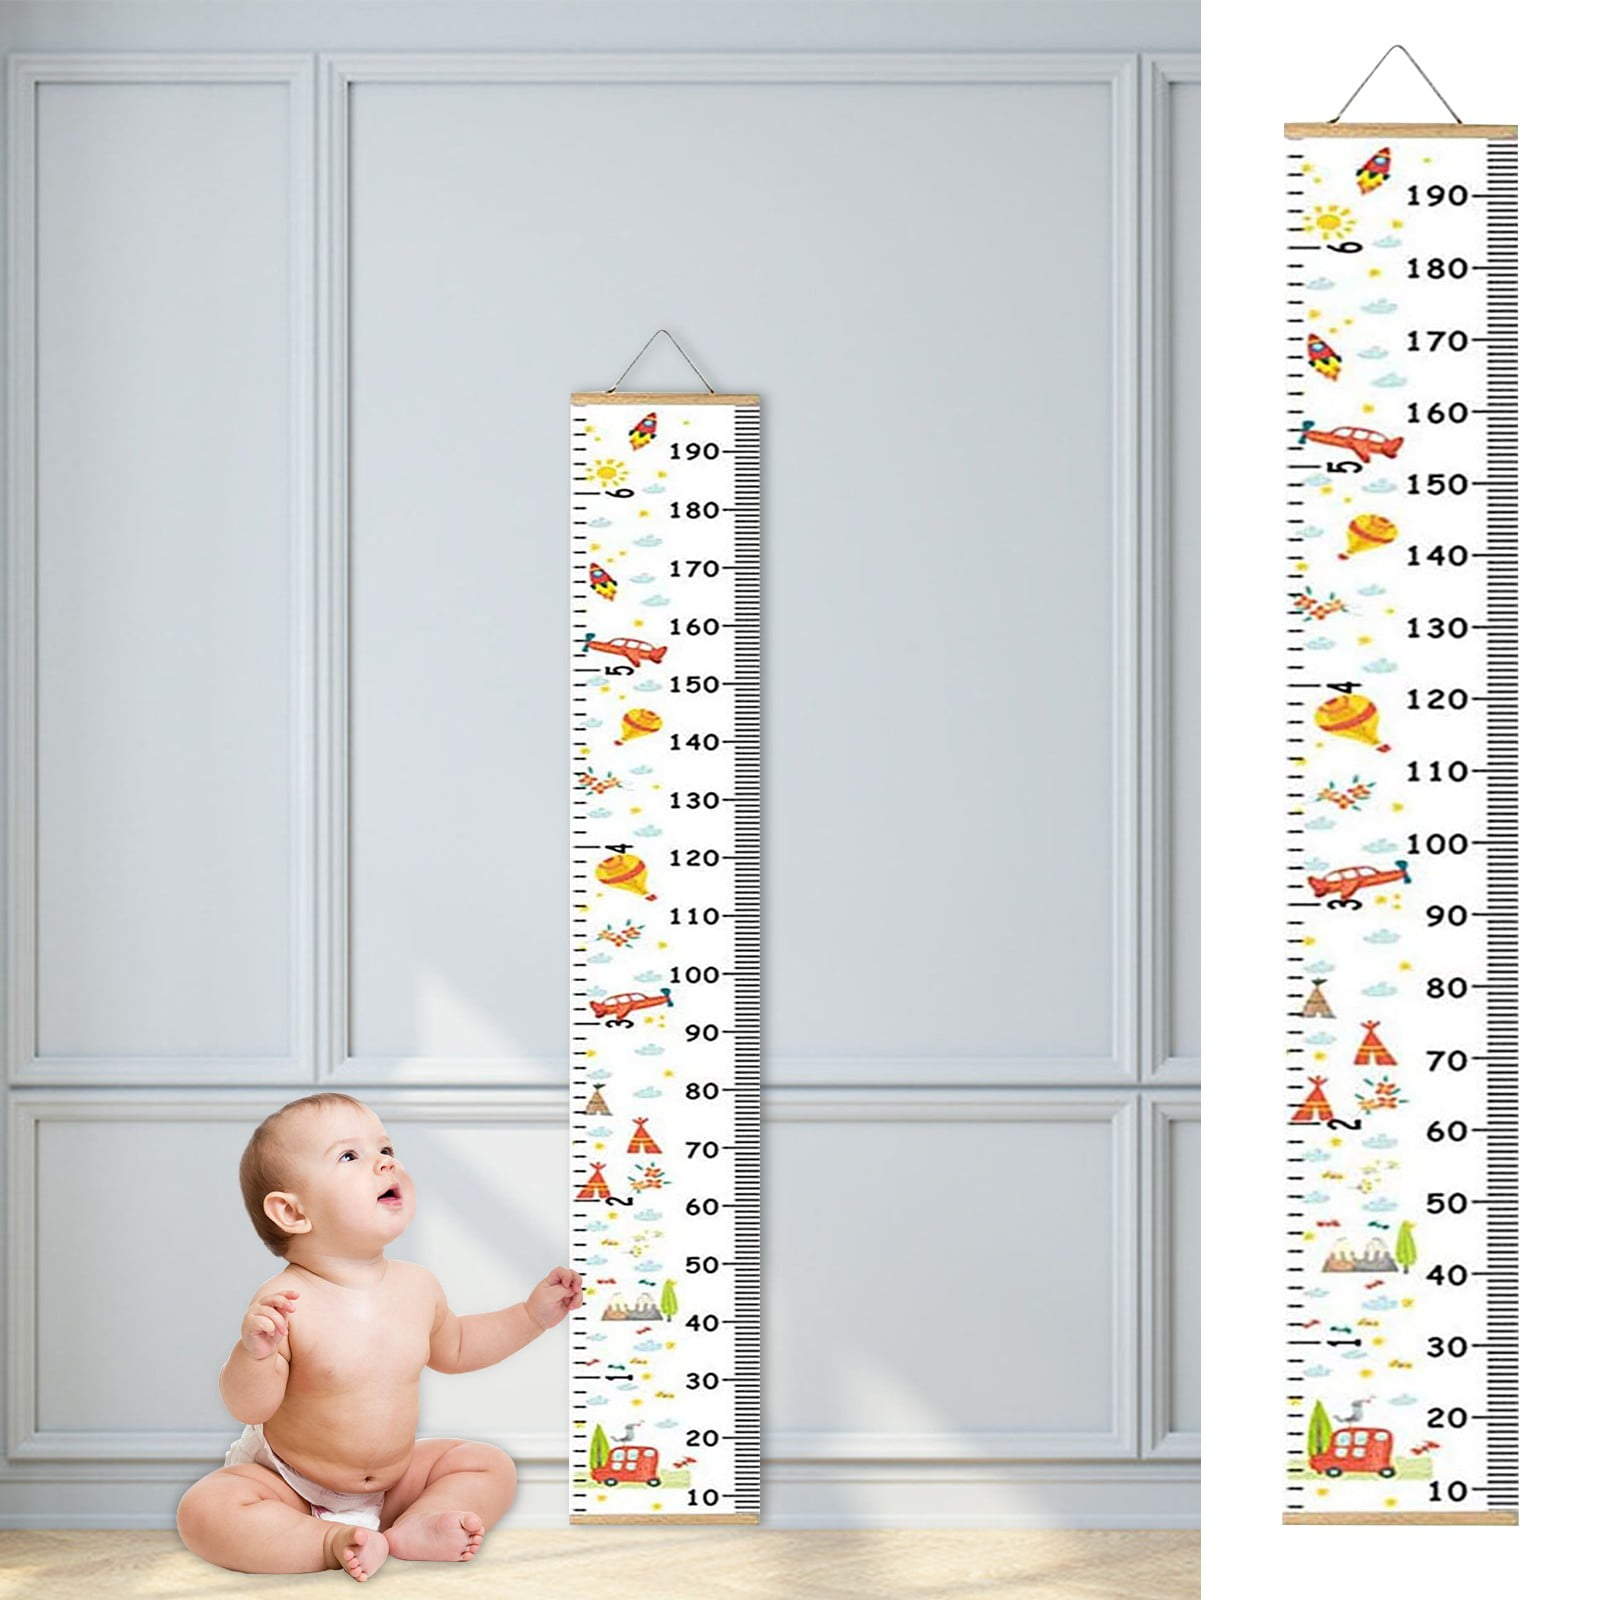 Baby Growth Chart Ruler Child Height Canvas Wall Decal Sticker Hanging Removable Measuring Tools for Children Kids Boys Girls Bedroom Room Decor Nursery Playroom Classroom 20x200cm/7.9 x 79 inch 